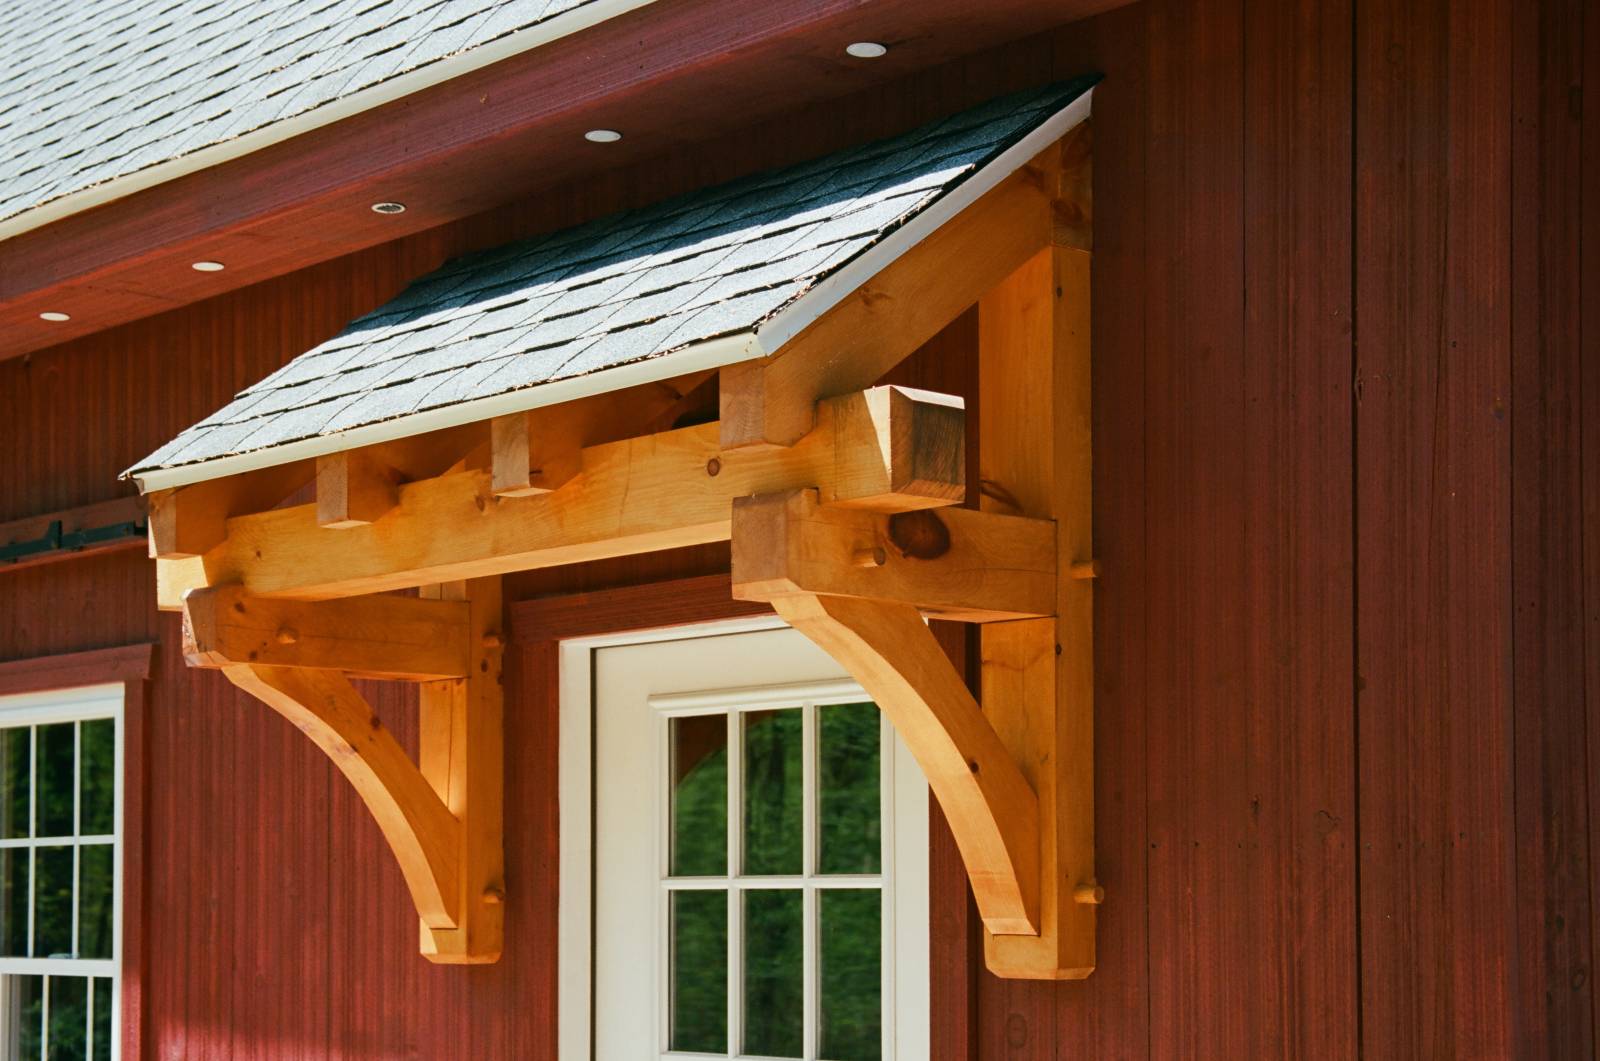 Timber frame eyebrow roof over the entry door